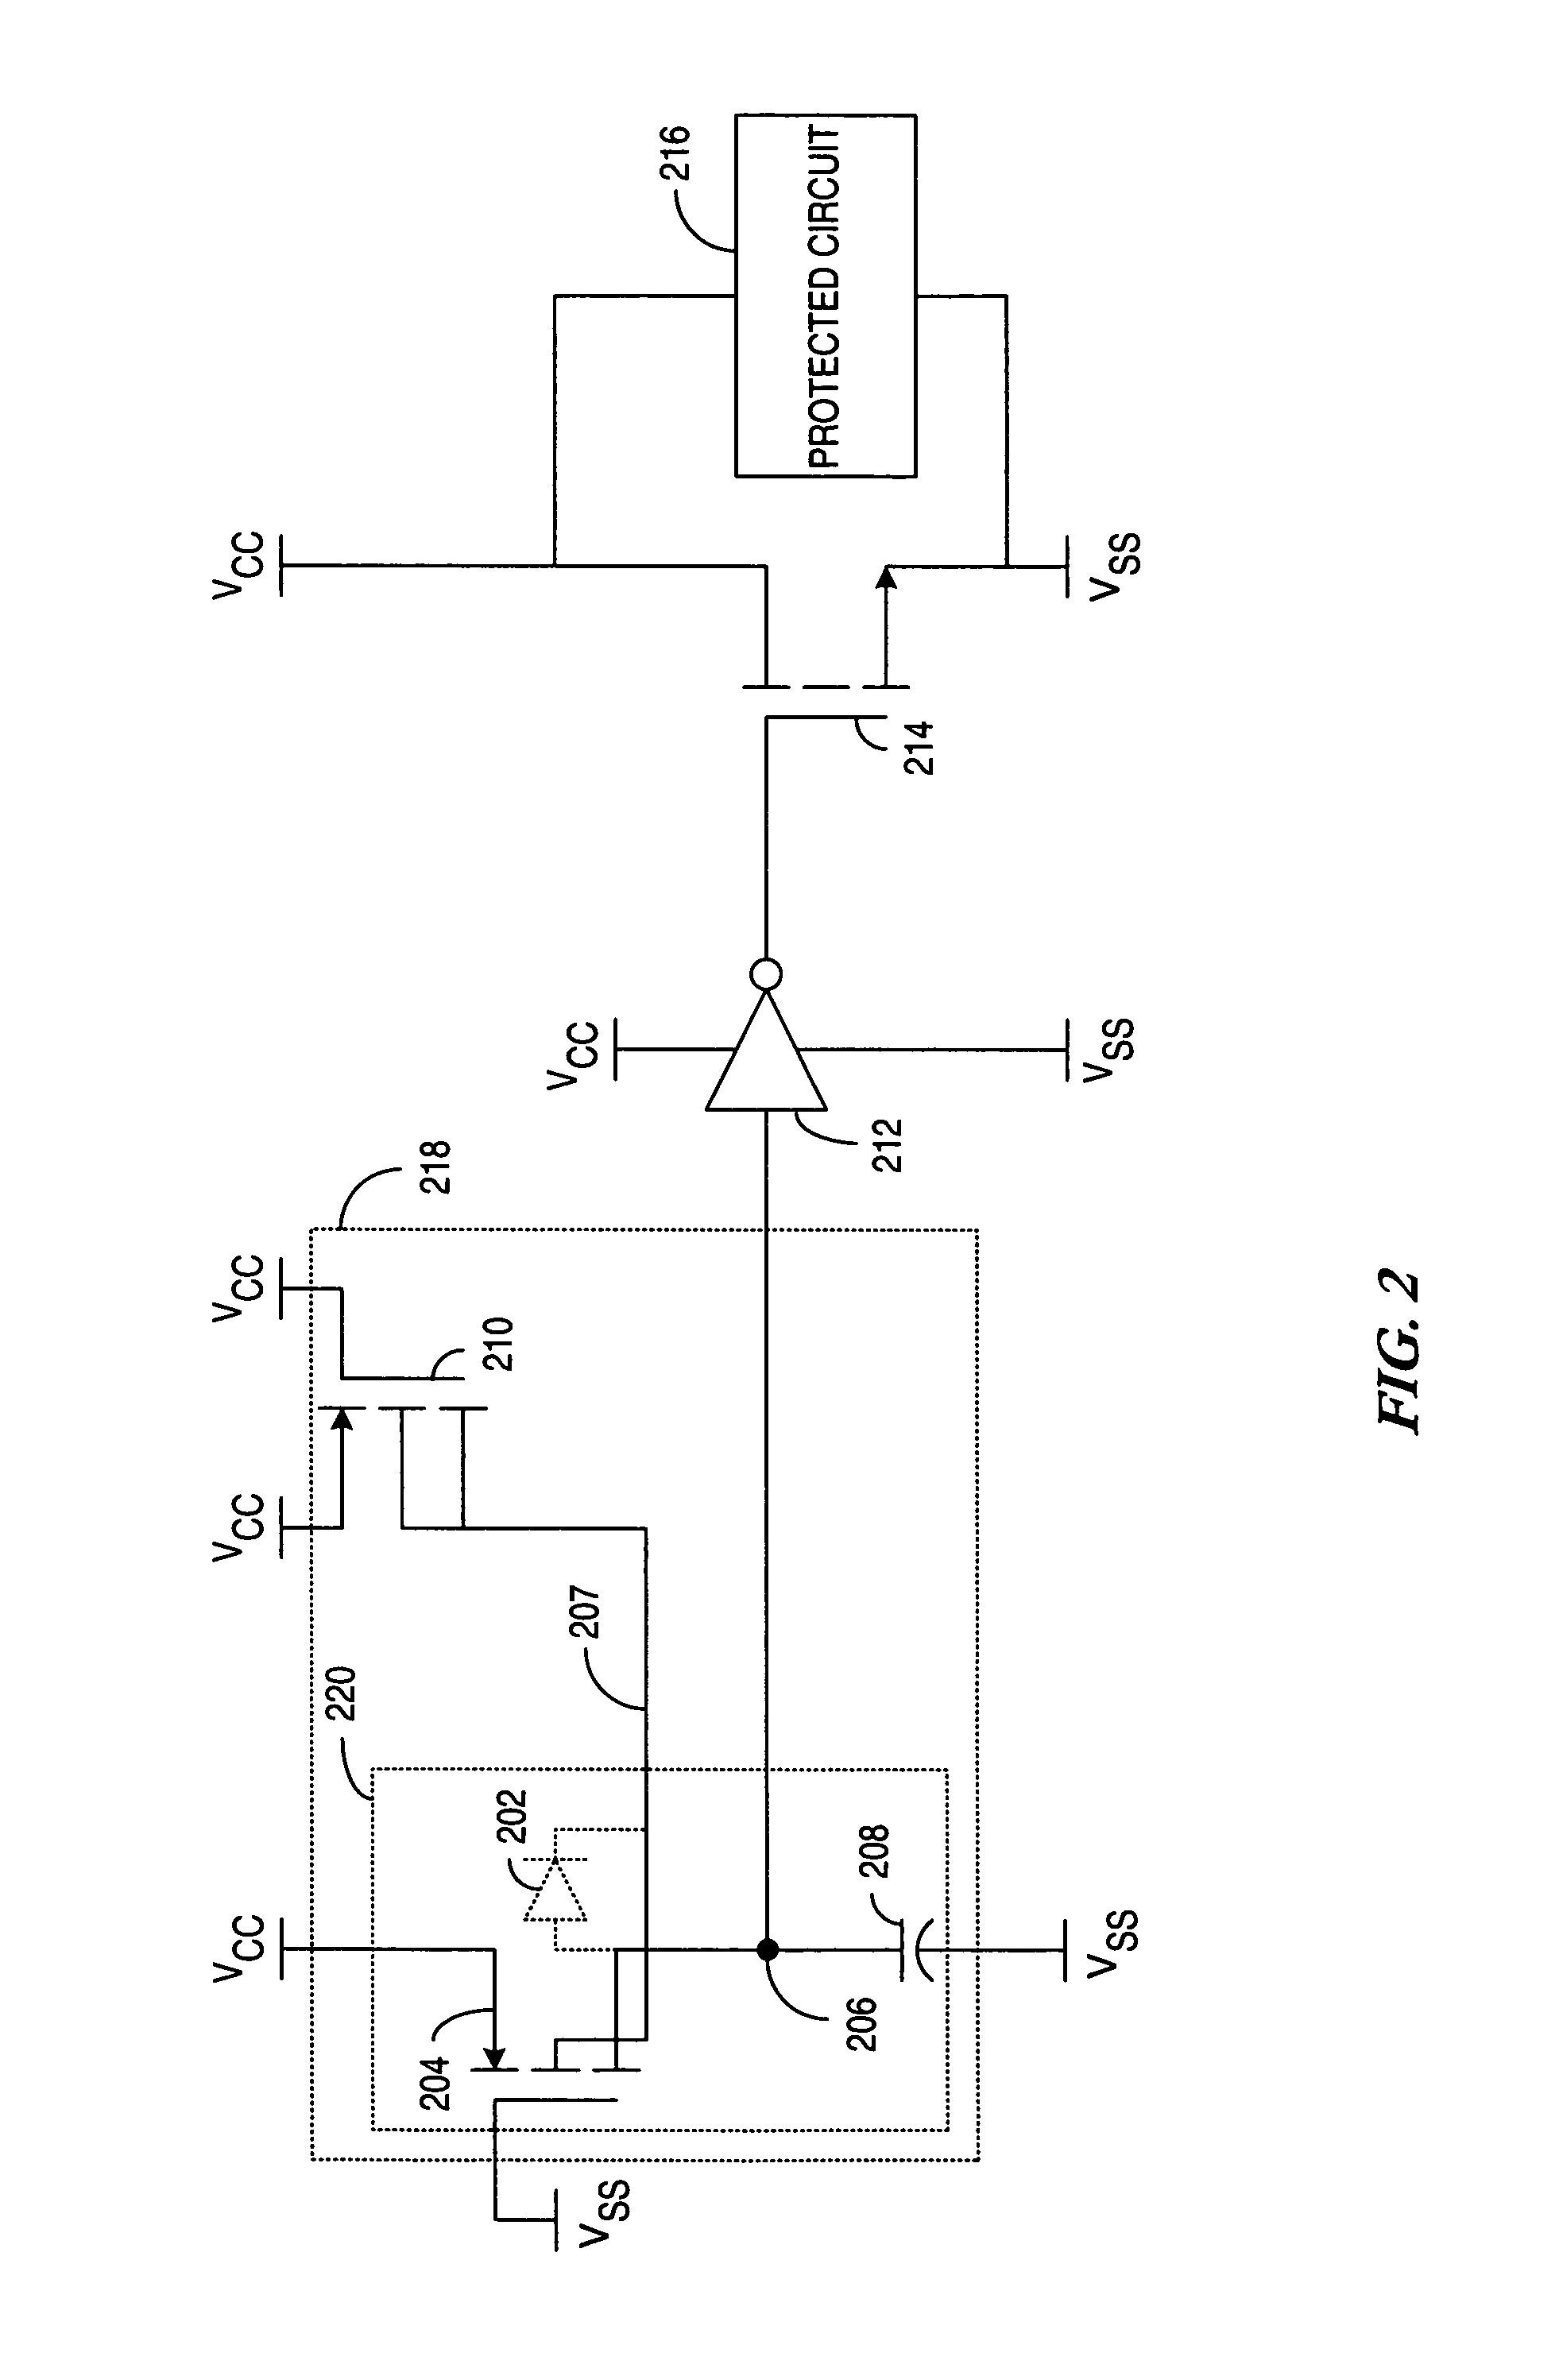 Method and apparatus for a floating well RC triggered electrostatic discharge power clamp